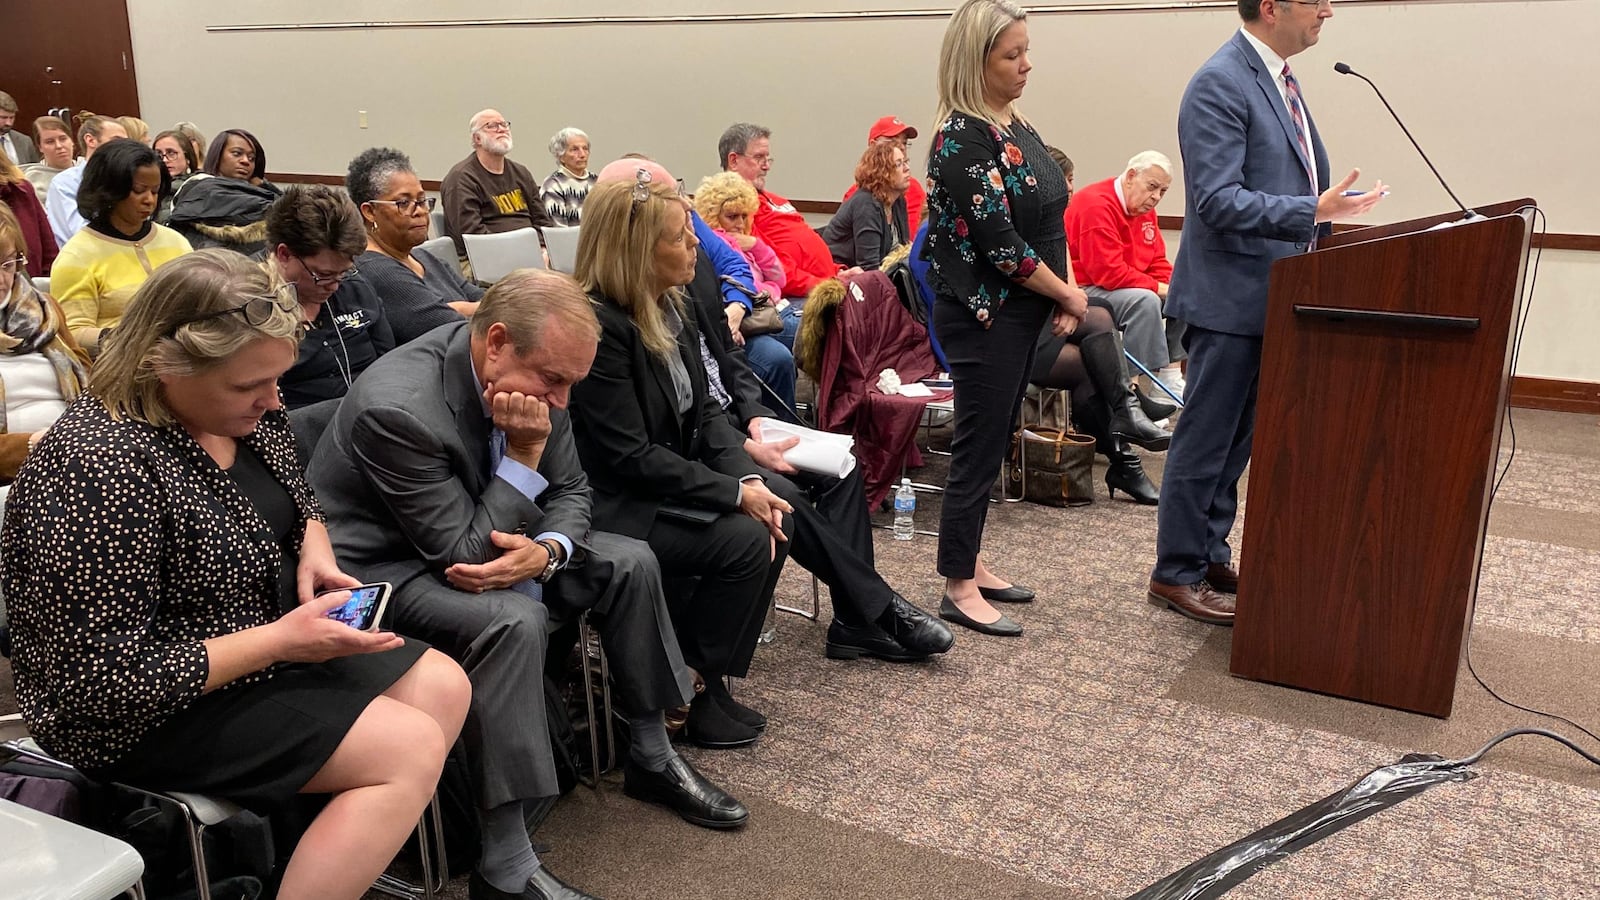 Charter Schools USA CEO Jon Hage, second from left, listens to discussion about the charter application for Howe High School on Friday, Dec. 13, 2019.